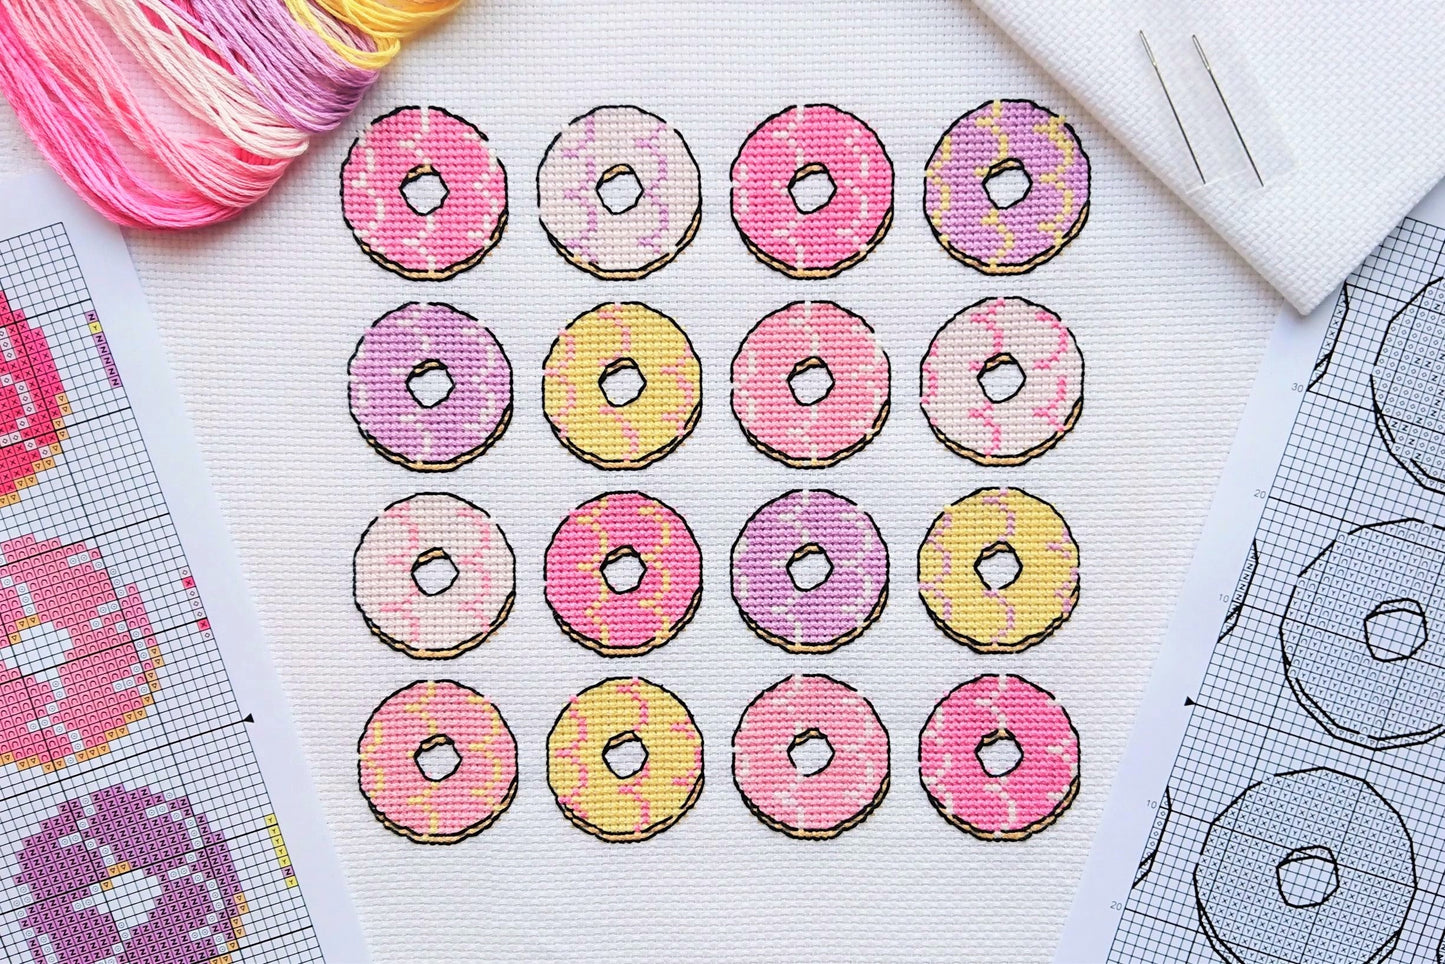 Iced Ring Biscuits Cross Stitch Kit